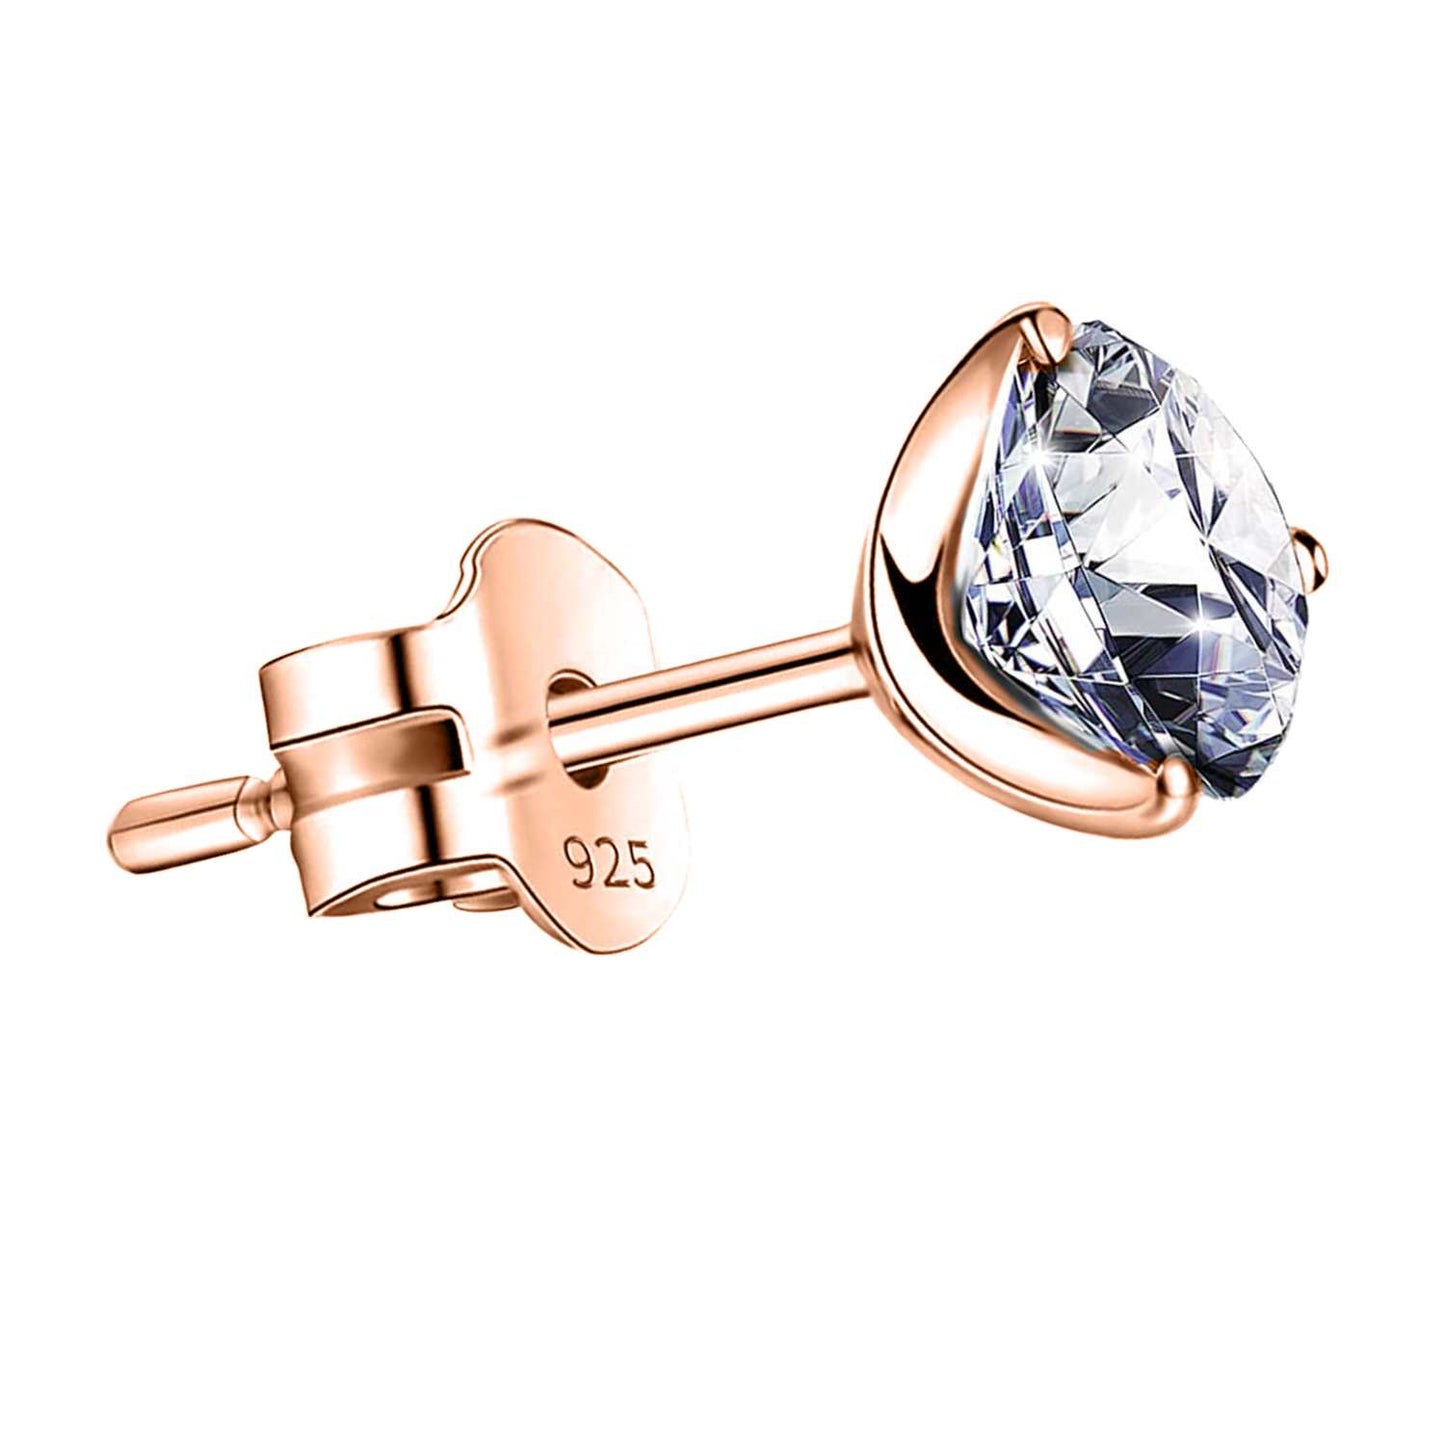 Mens Rose Gold Solitaire Stud Earrings in 92.5 Silver - 1 piece - Sparkling Martini by HighSpark - Sparkling Swiss Zirconia in Martini Style 3 Prong Setting - 18K Gold Finish